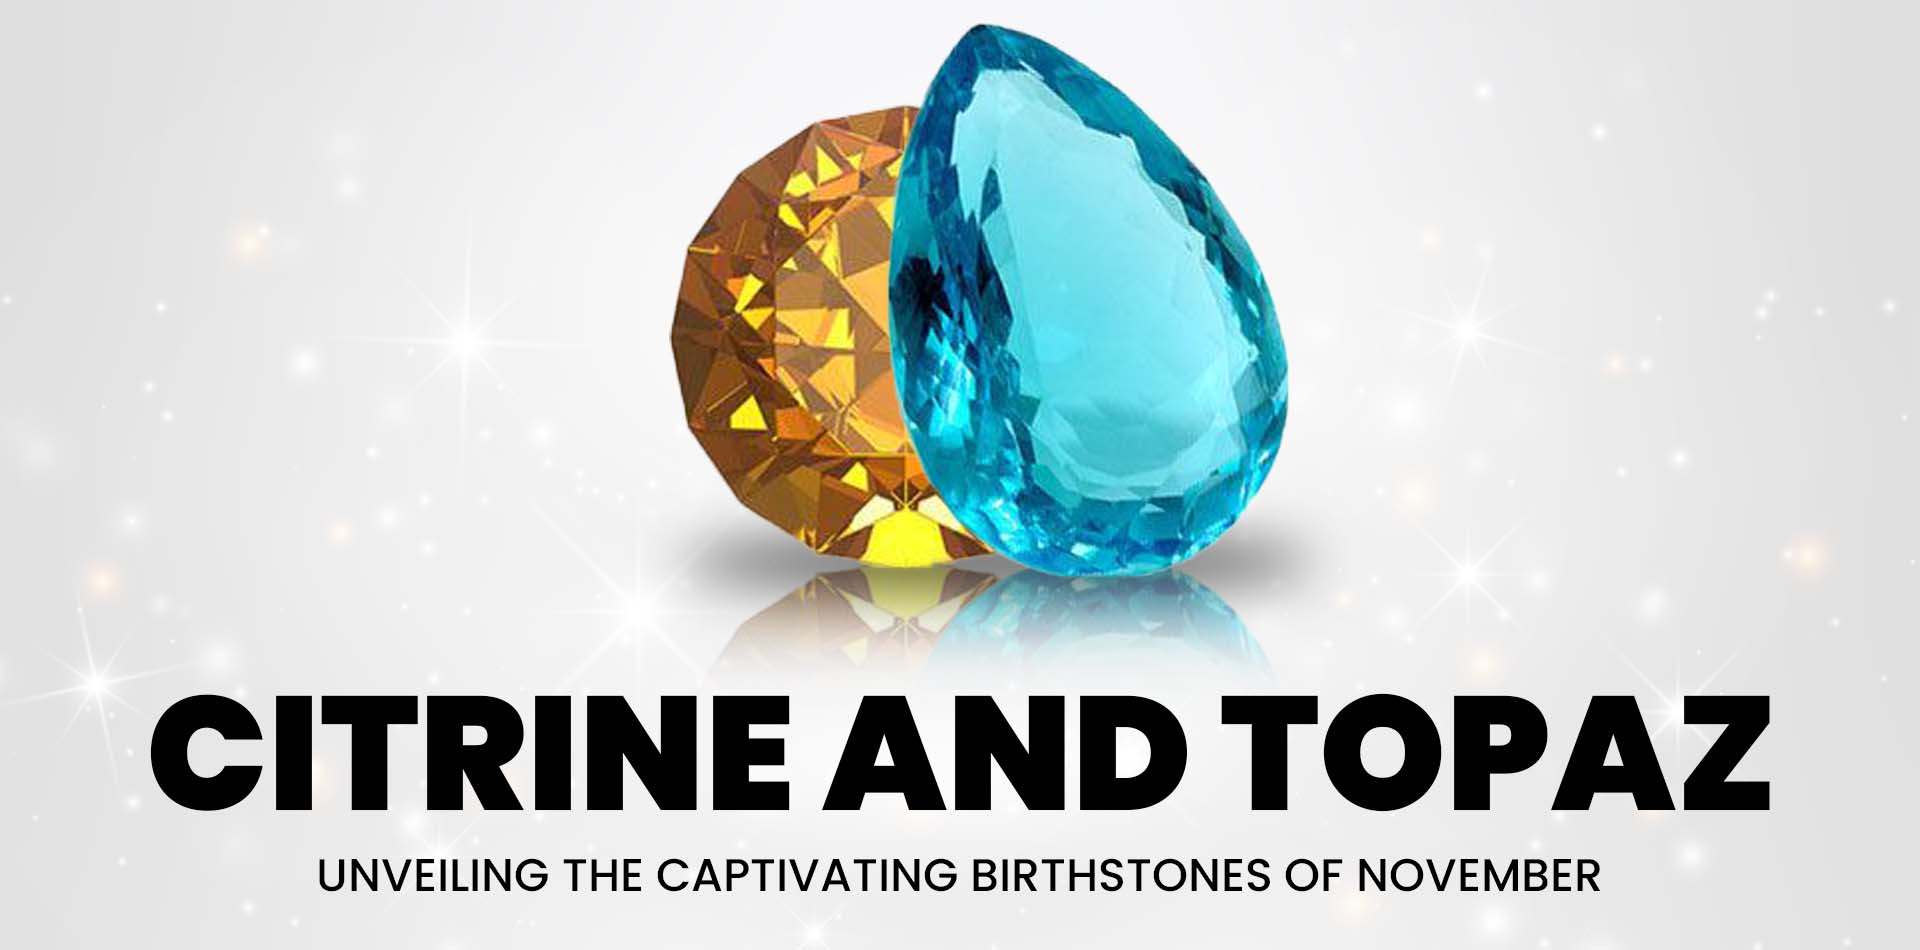 Citrine and Topaz: Unveiling the Captivating Birthstones of November